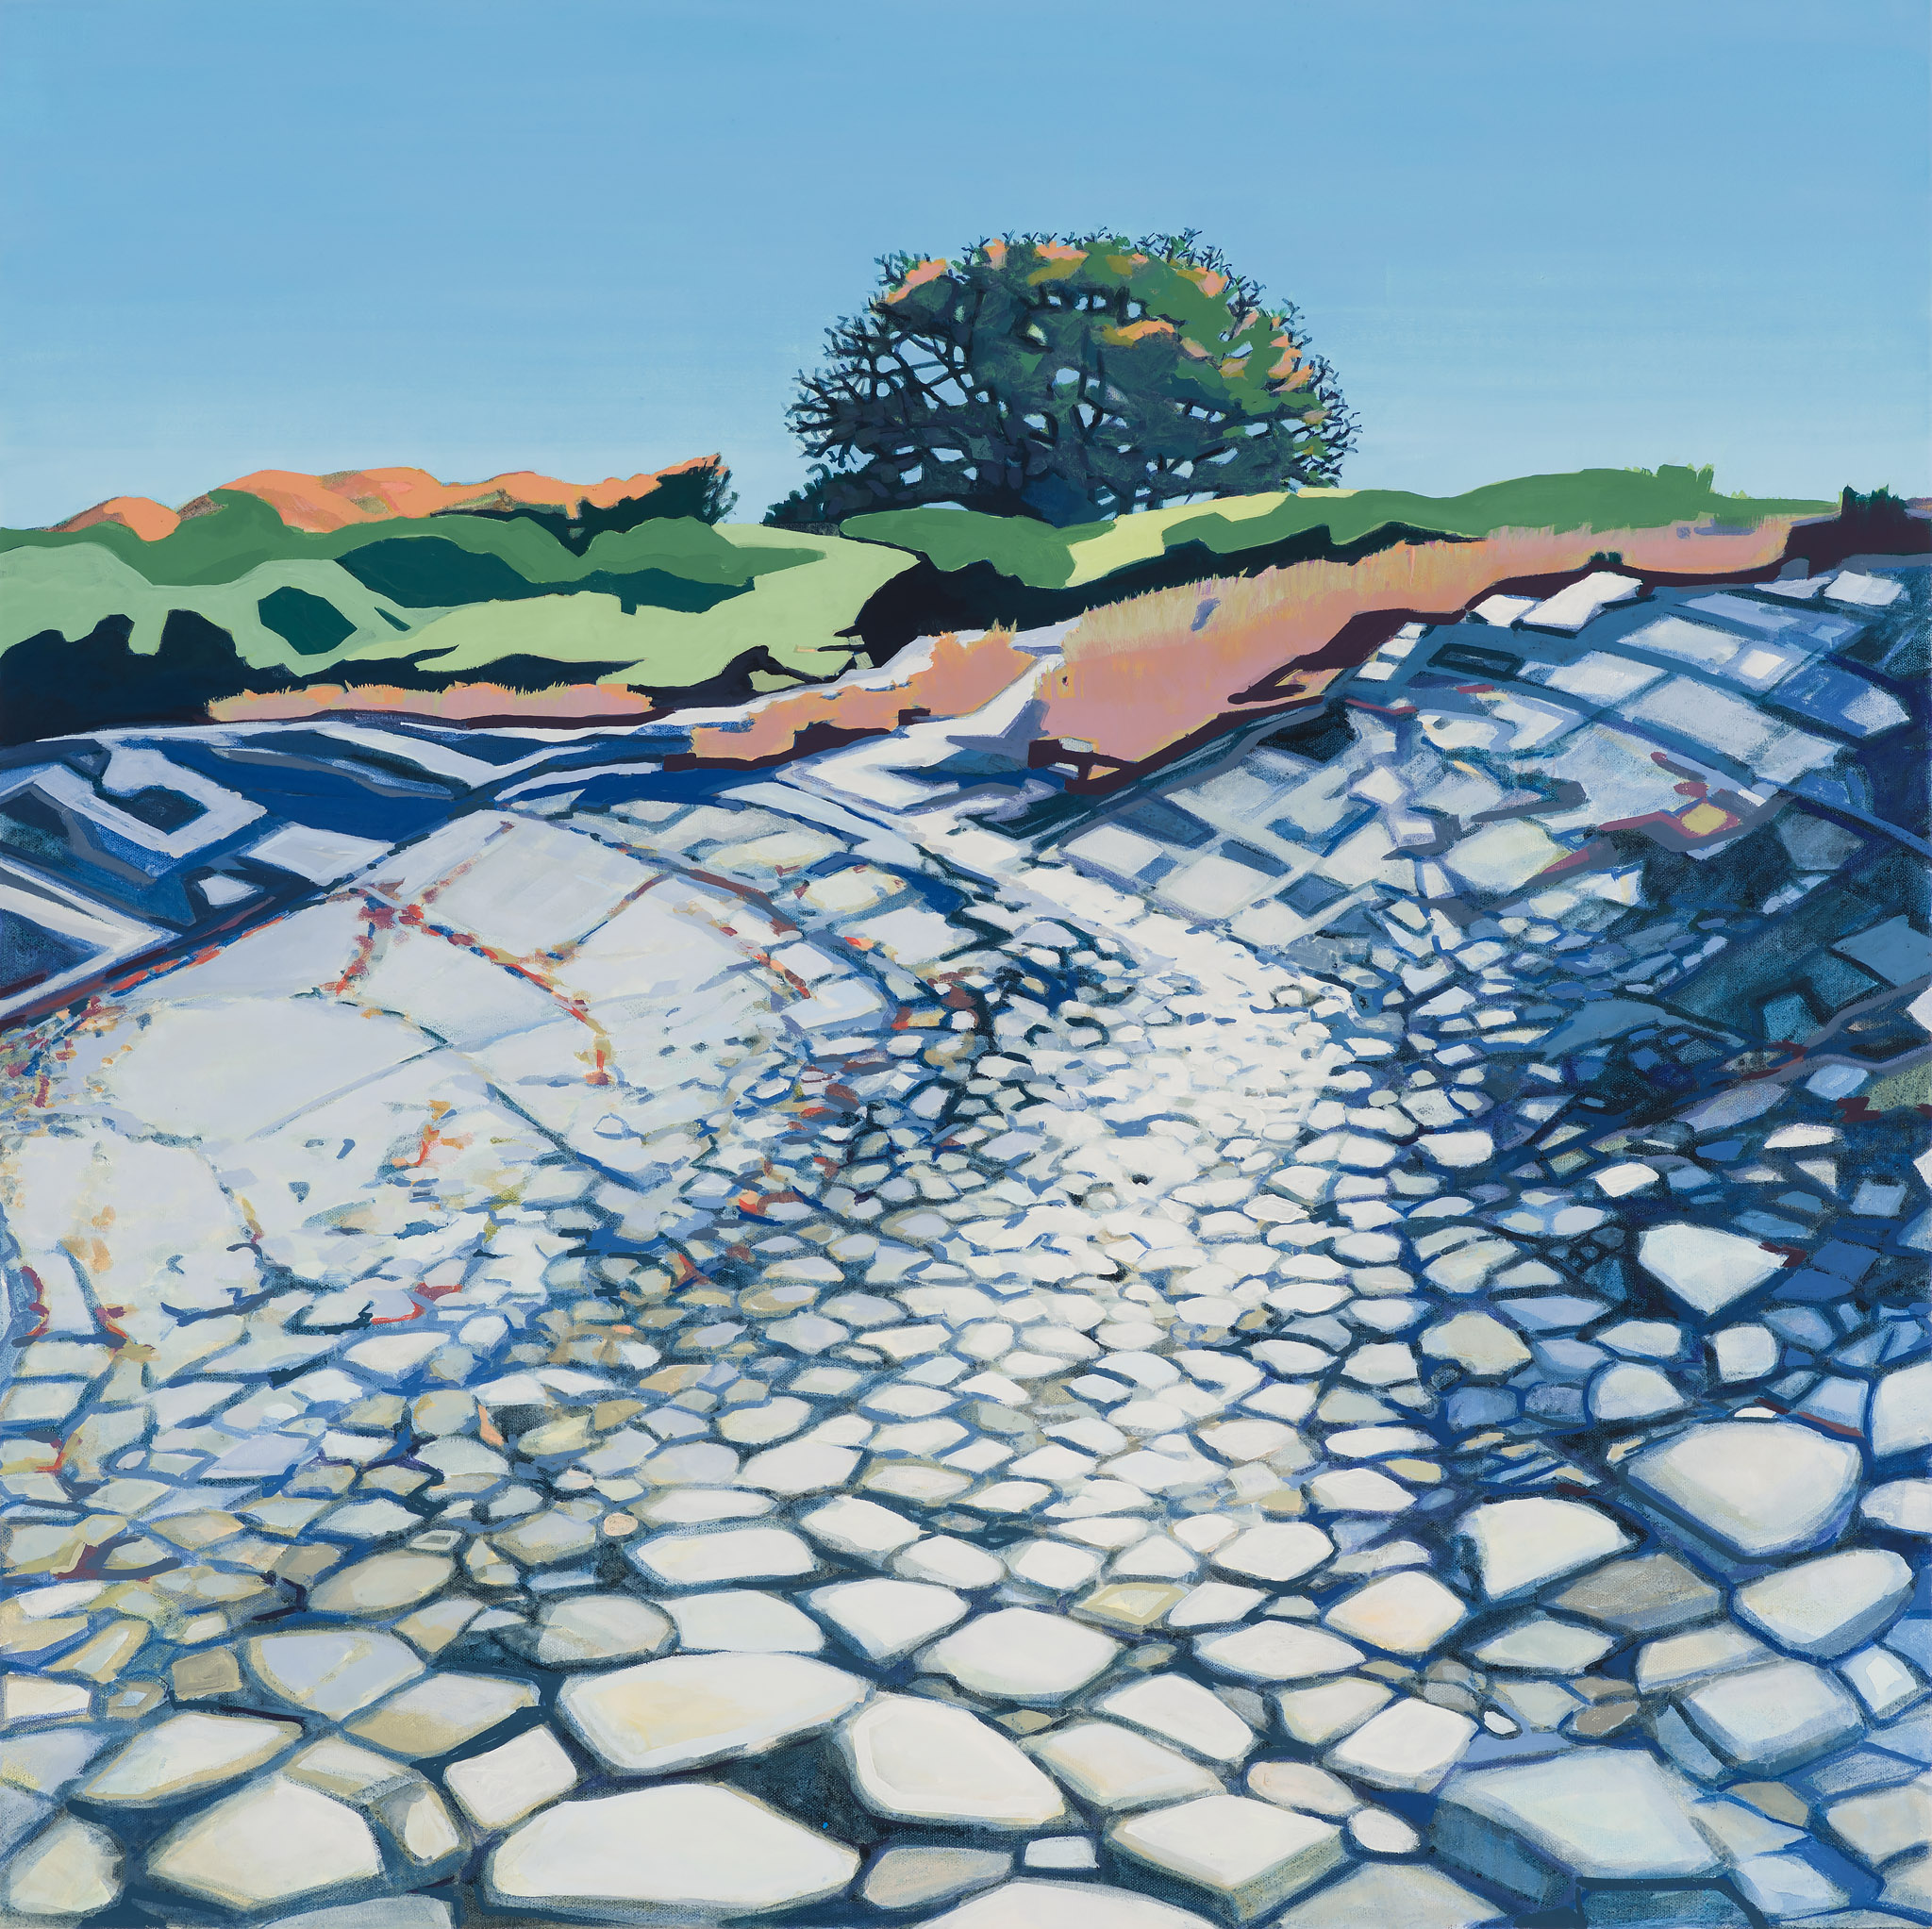 Eastern Cove Path, 10/11/20, 14:47, 43.5300552, -70.310508, 2021, oil on canvas, 30 x 30 inches